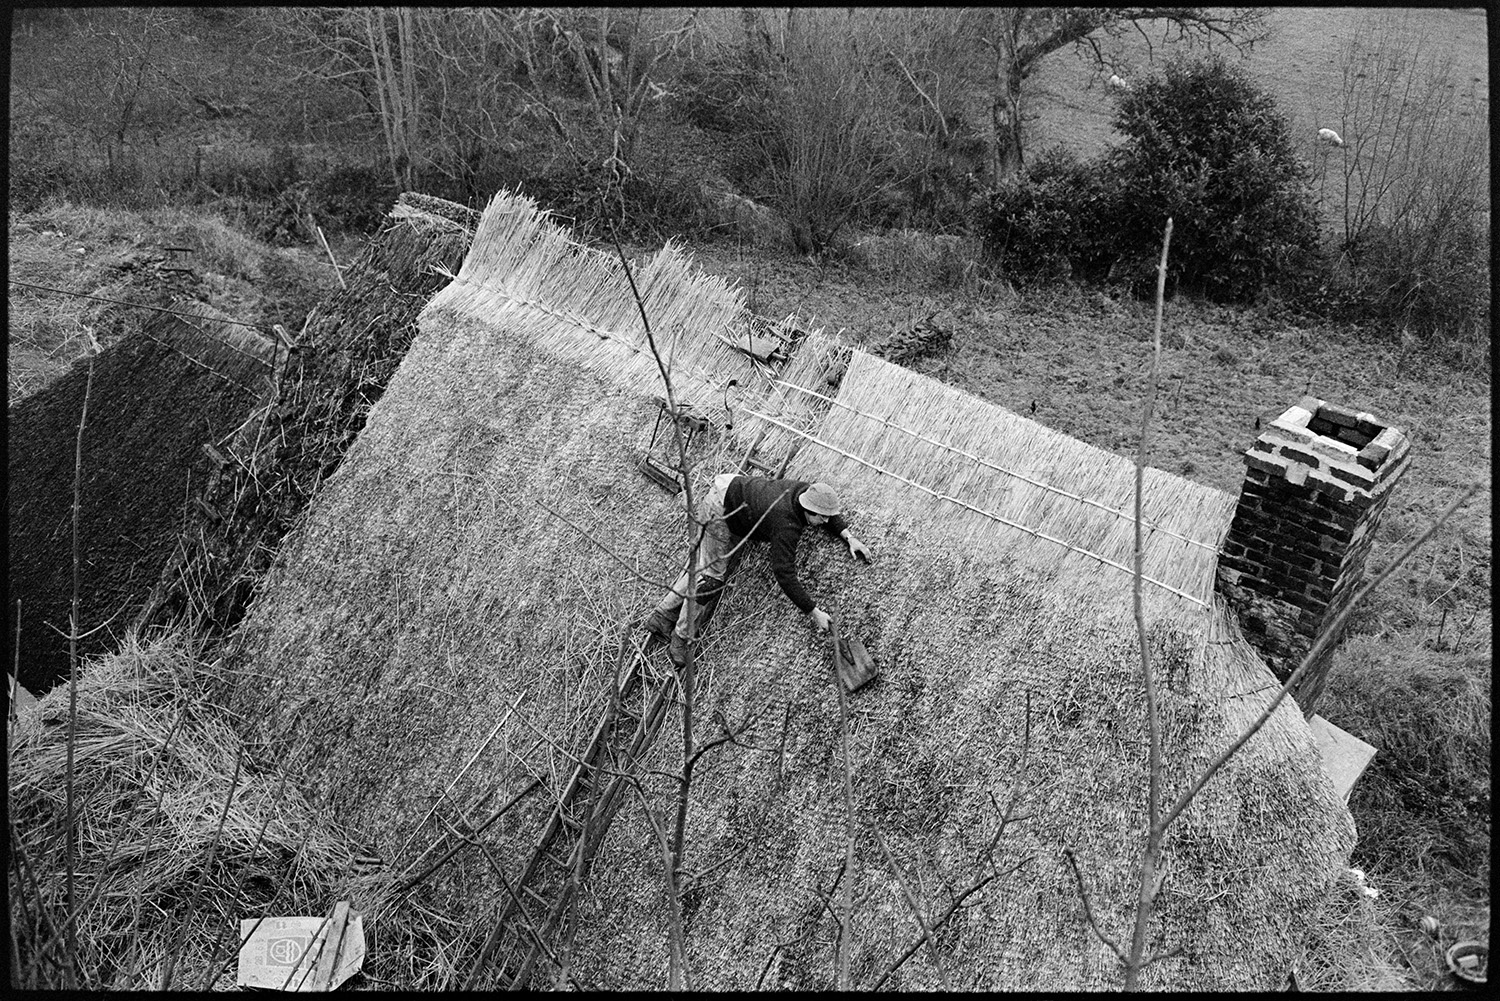 Thatcher working on cottage roof, seen from above. 
[Mr Littlejohn up a ladder thatching a roof at Addisford, Dolton. The images is taken from above the roof.]